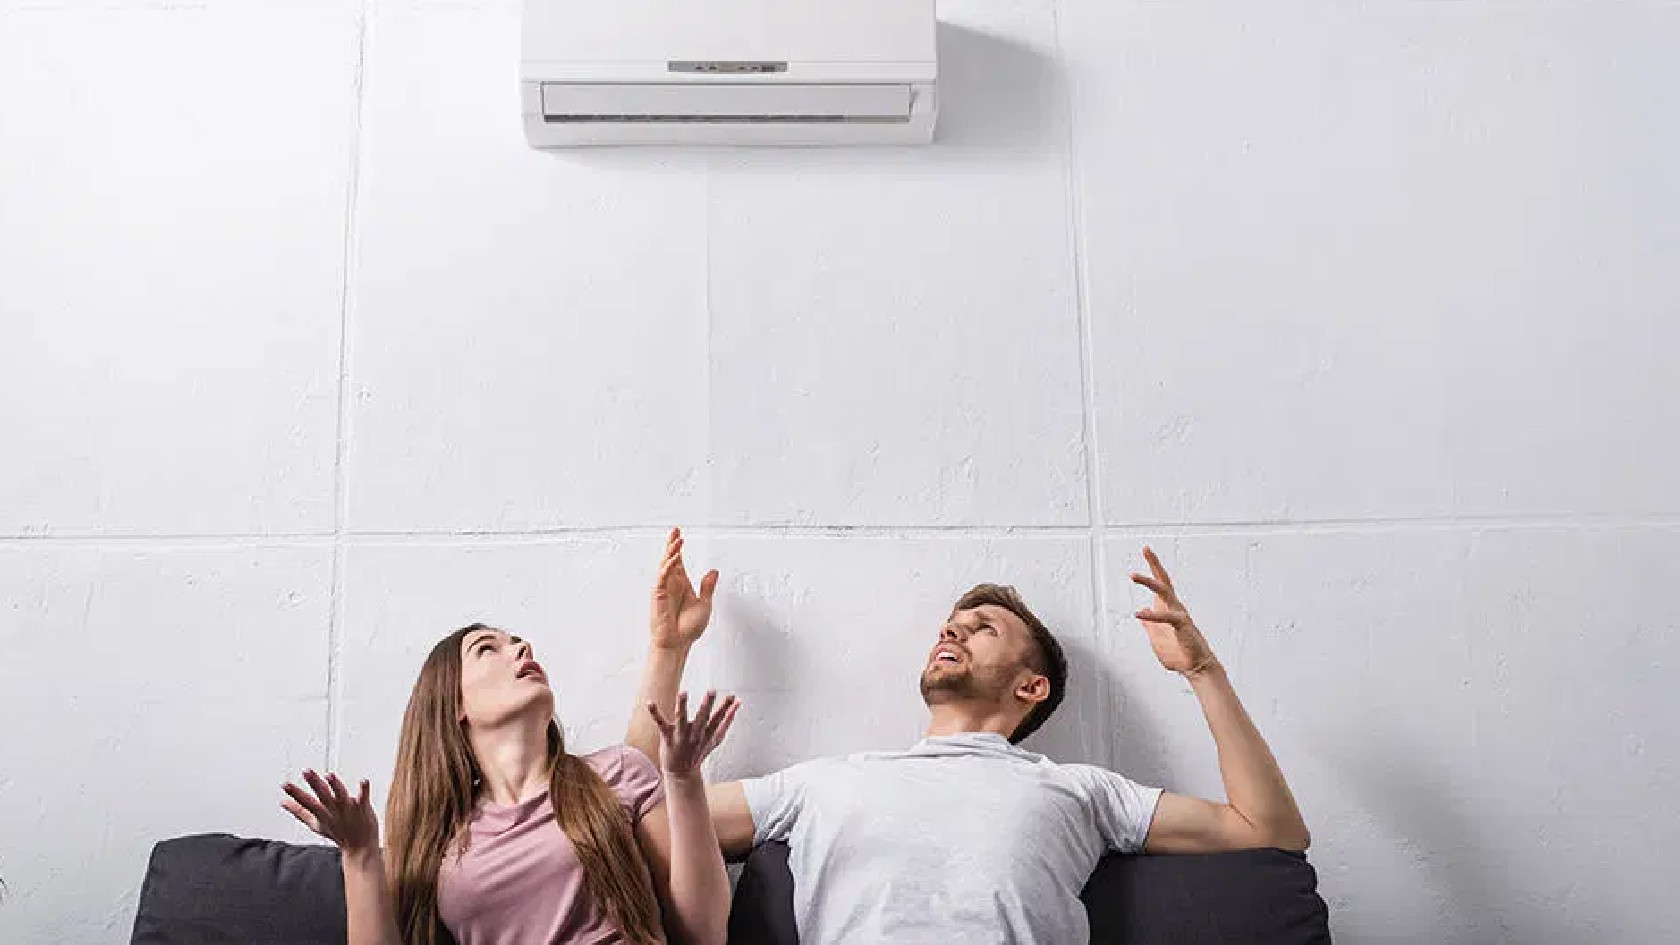 DIY Air Conditioning Options that you can try this summer